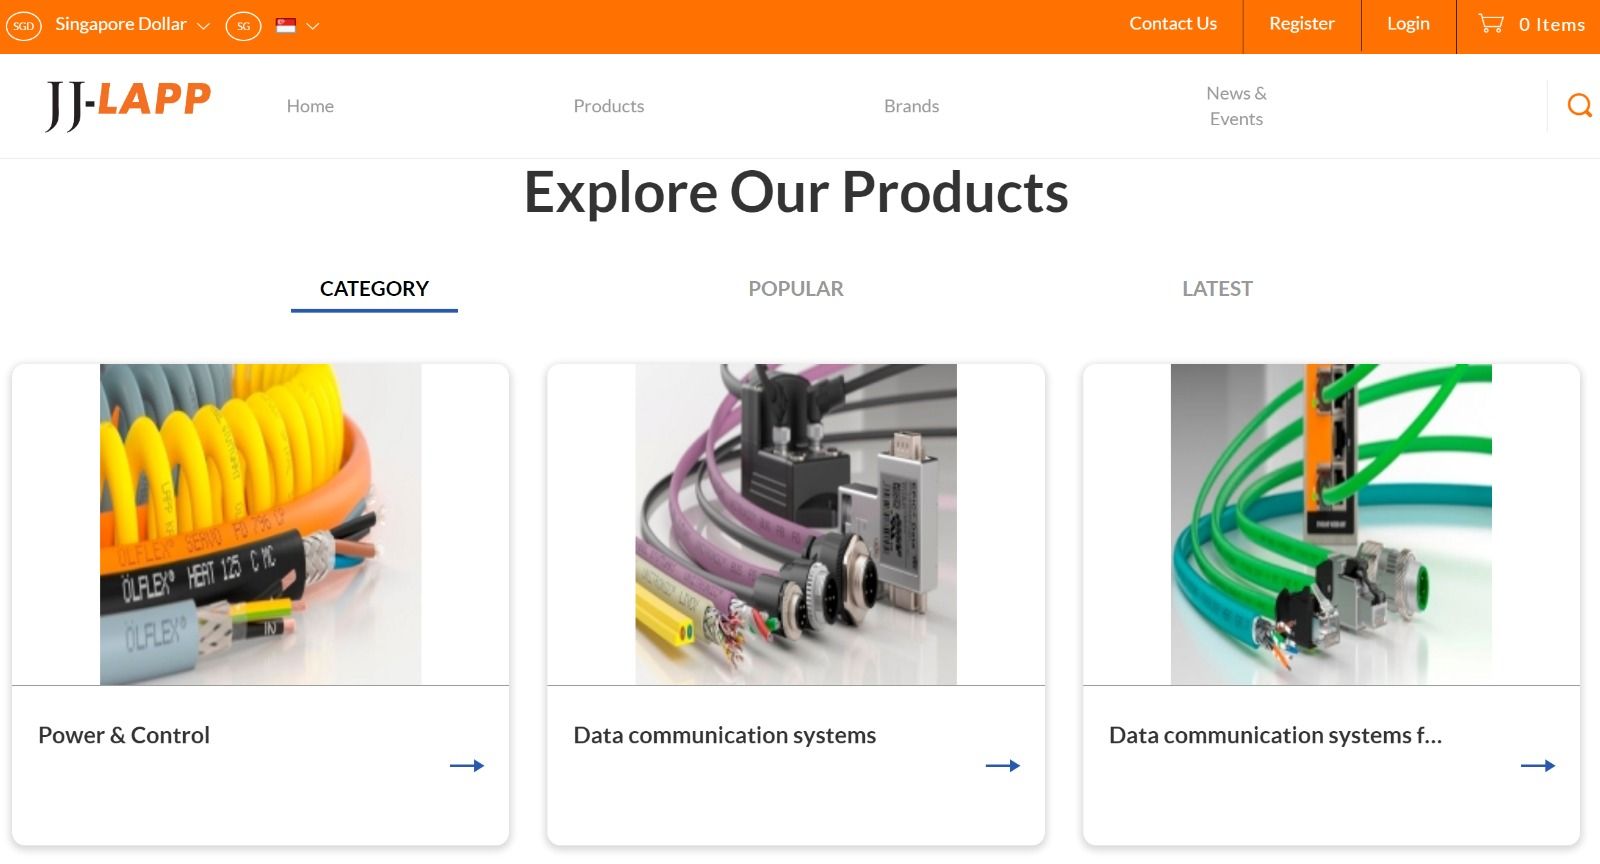 JJ-LAPP’s new e-shop offers a range of products and solutions to customers from anywhere, at any time